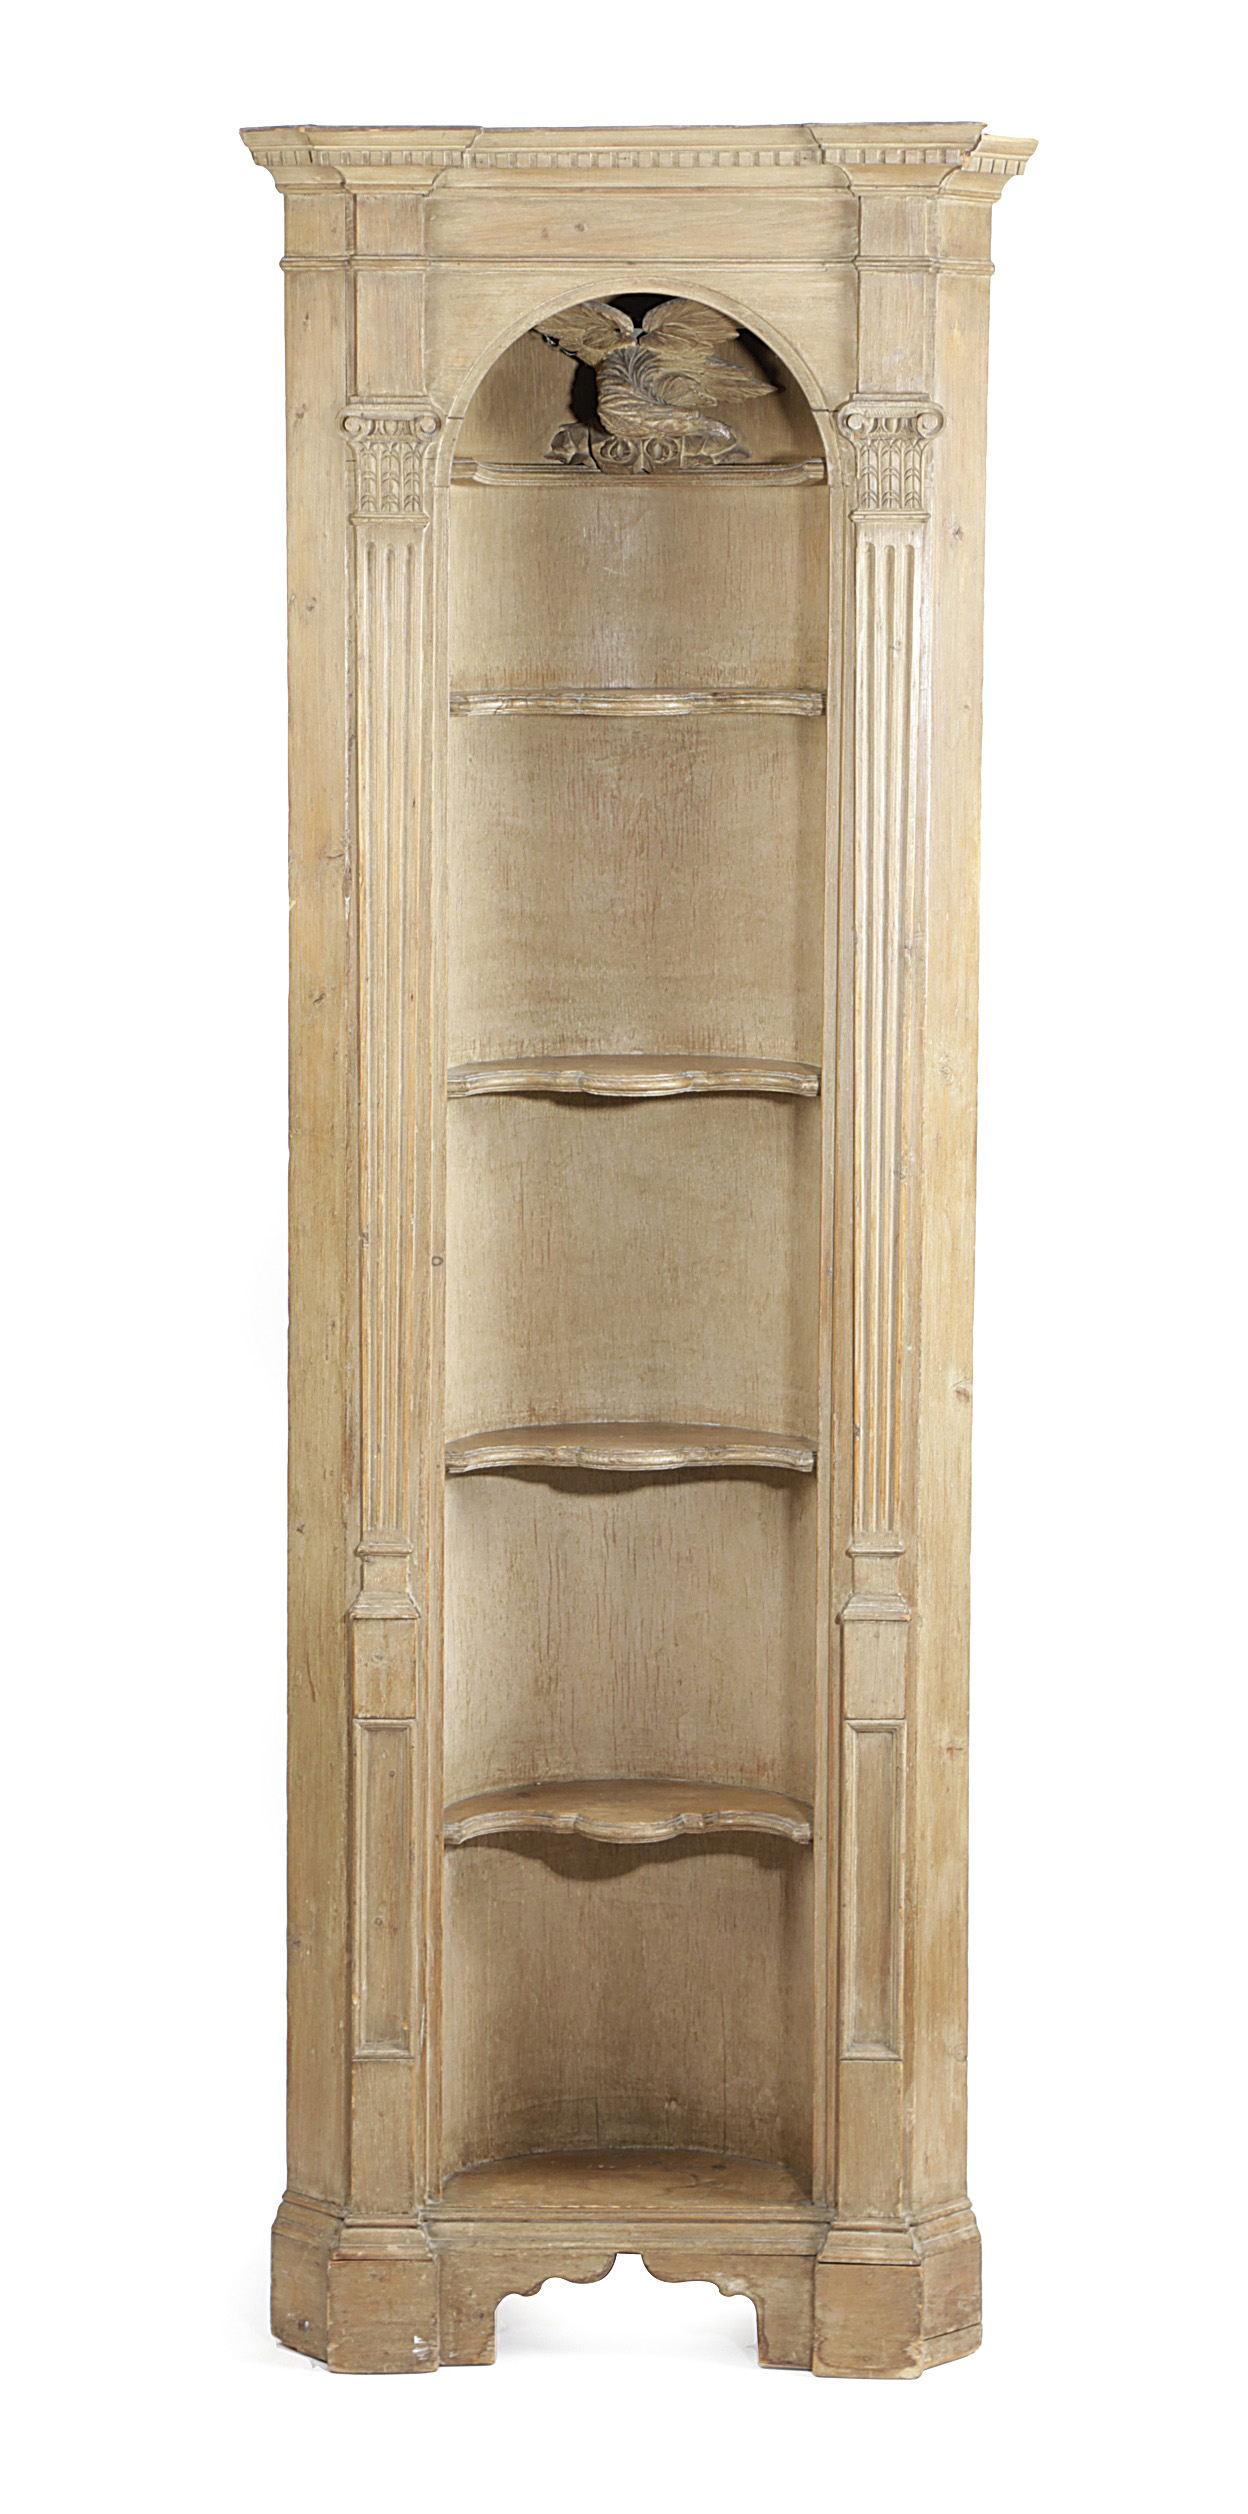 A PINE STANDING CORNER CABINET PROBABLY LATE 18TH / EARLY 19TH CENTURY with an applied carved